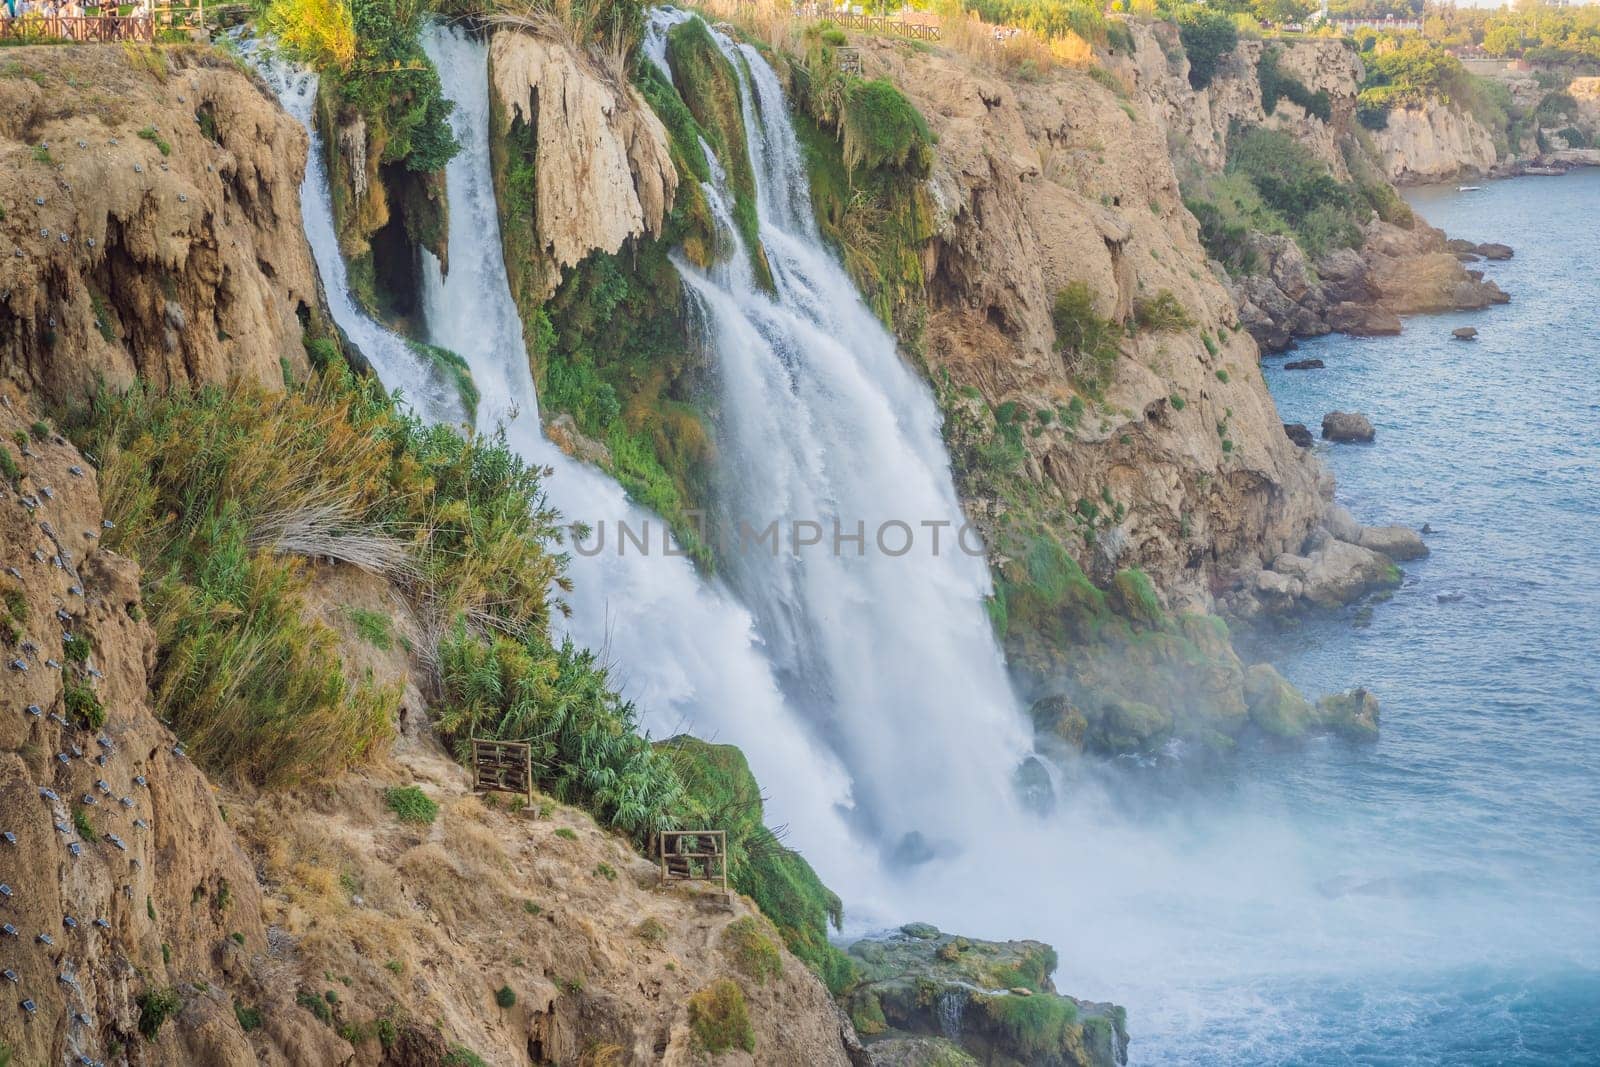 Lower Duden Falls drop off a rocky cliff falling from about 40 m into the Mediterranean Sea in amazing water clouds. Tourism and travel destination photo in Antalya, Turkey. Turkiye. by galitskaya